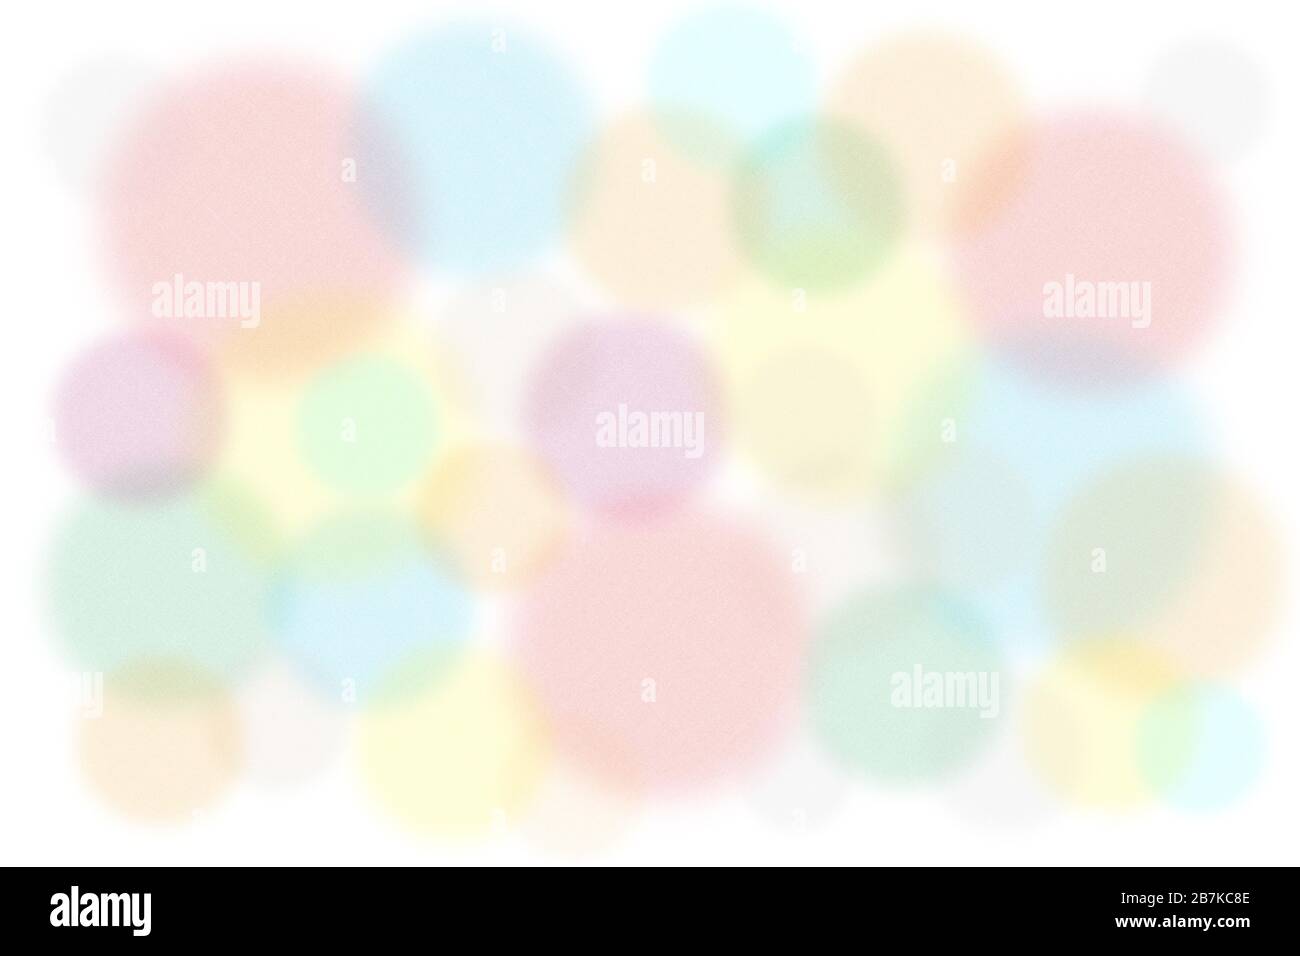 Light watercolor dots, circle shapes, Blurred decorative design background Stock Photo